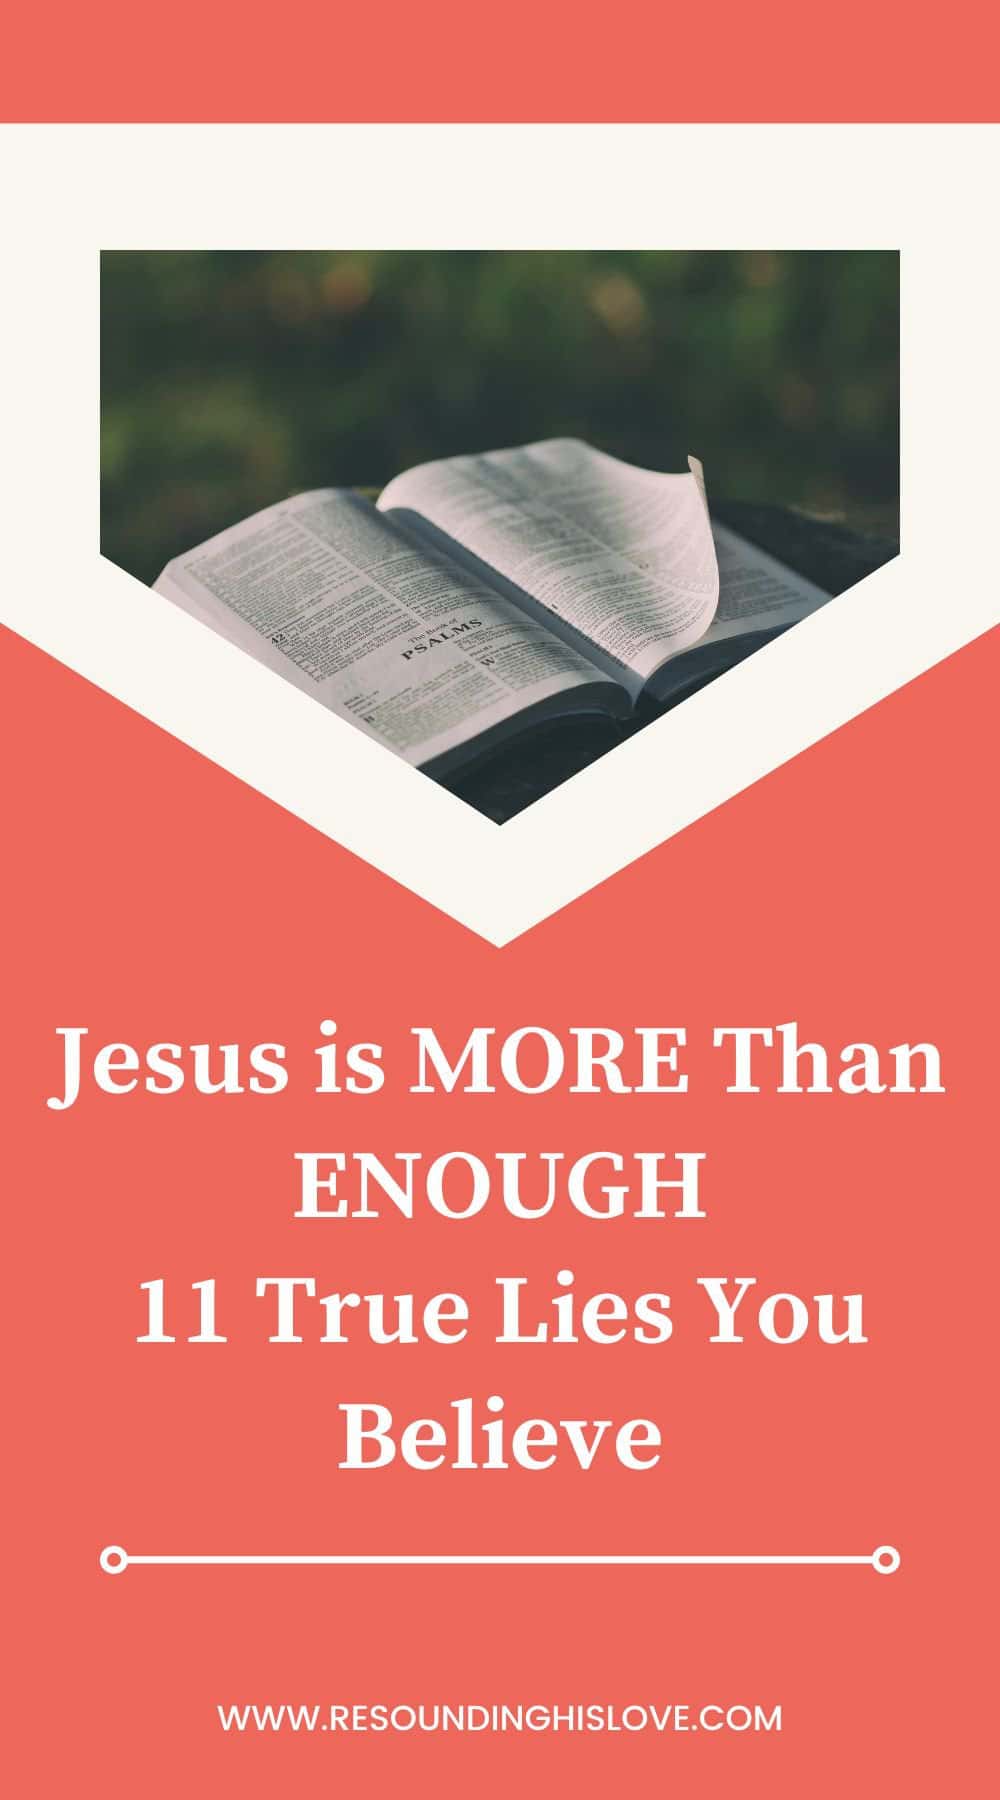 Jesus Is More Than Enough Here are 11 True Lies You Believe